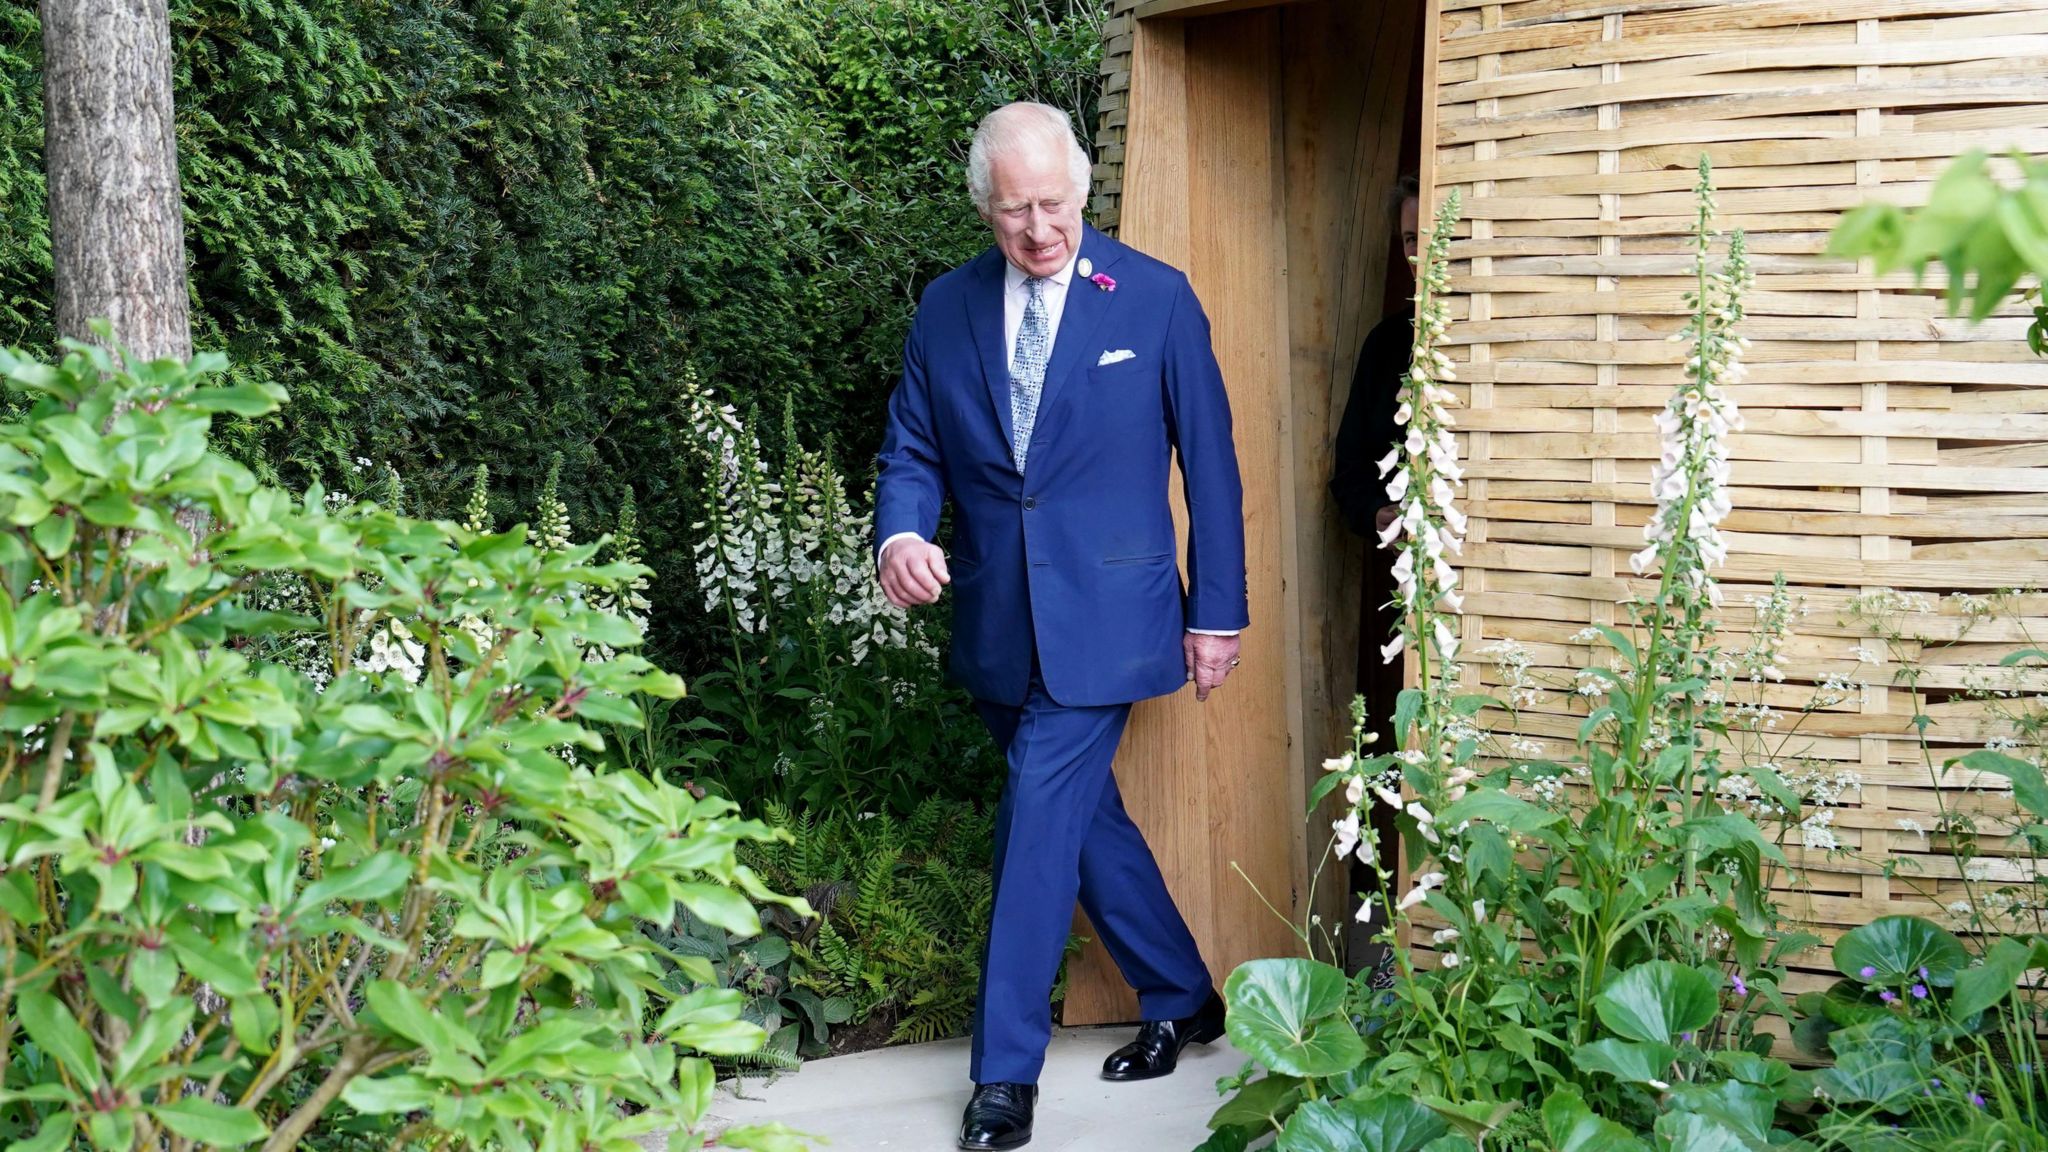 King Charles at the Chelsea Flower Show